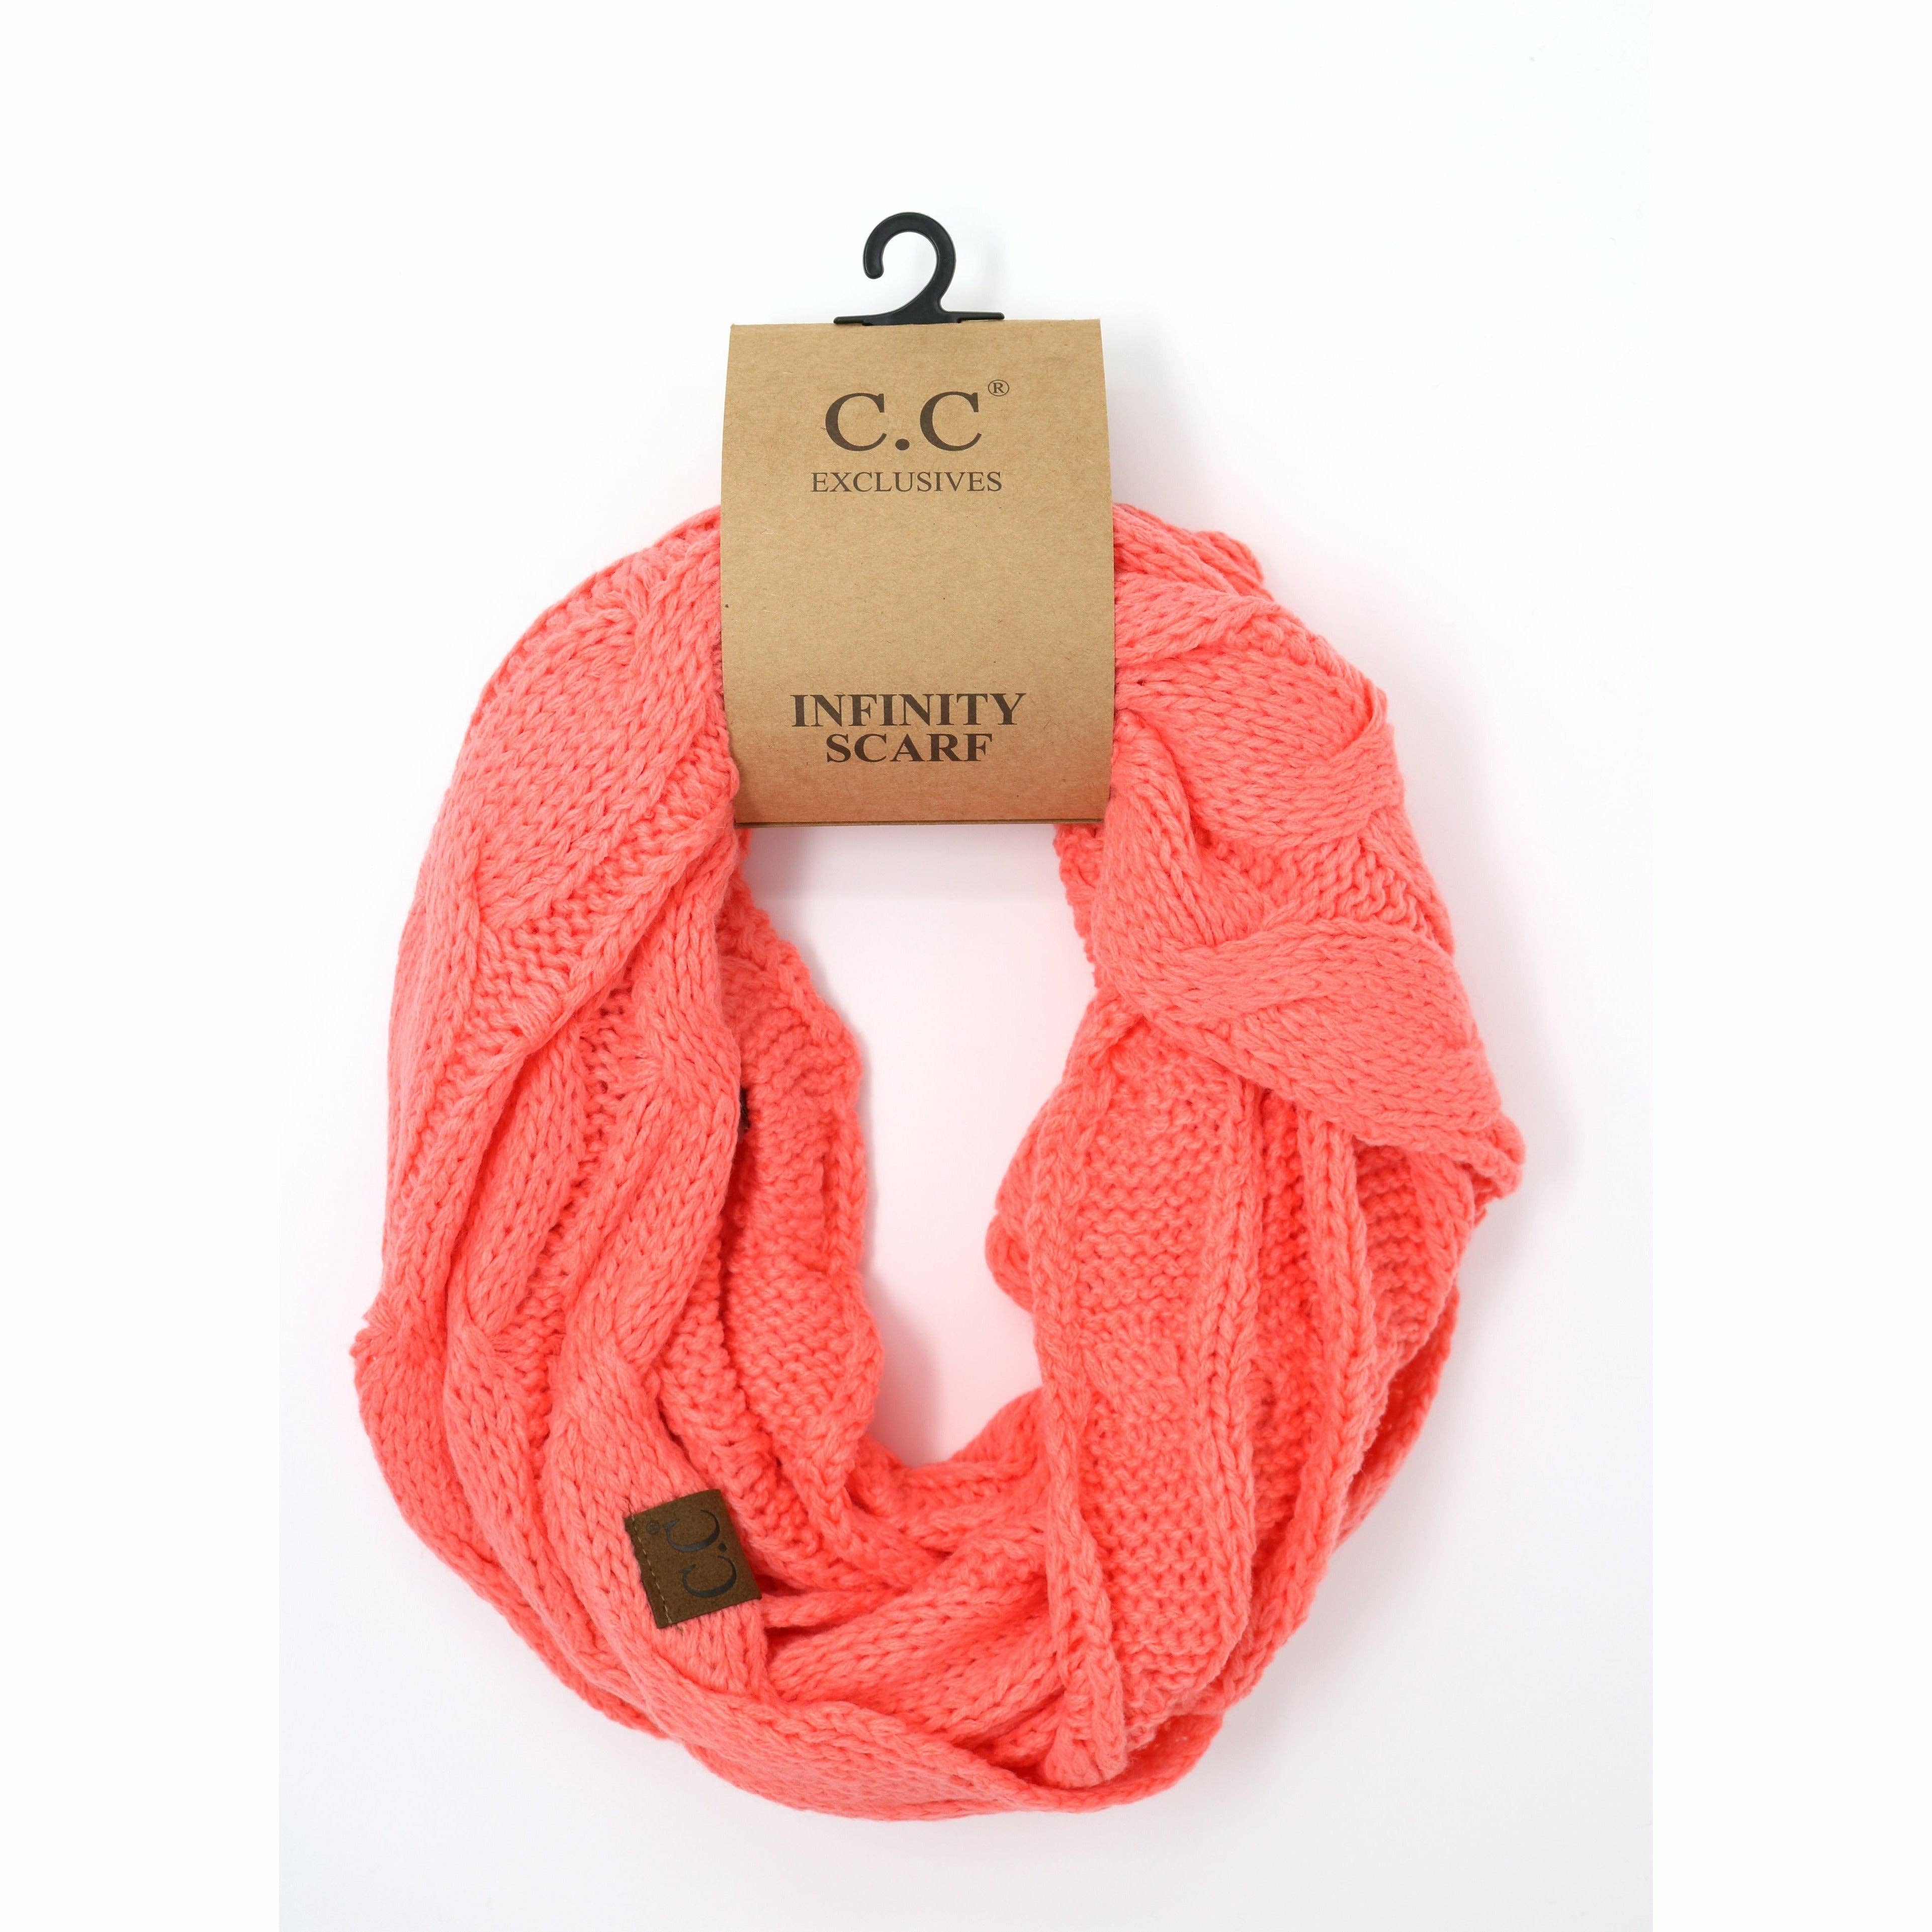 Solid Cable Knit CC Infinity Scarf SF800: Black